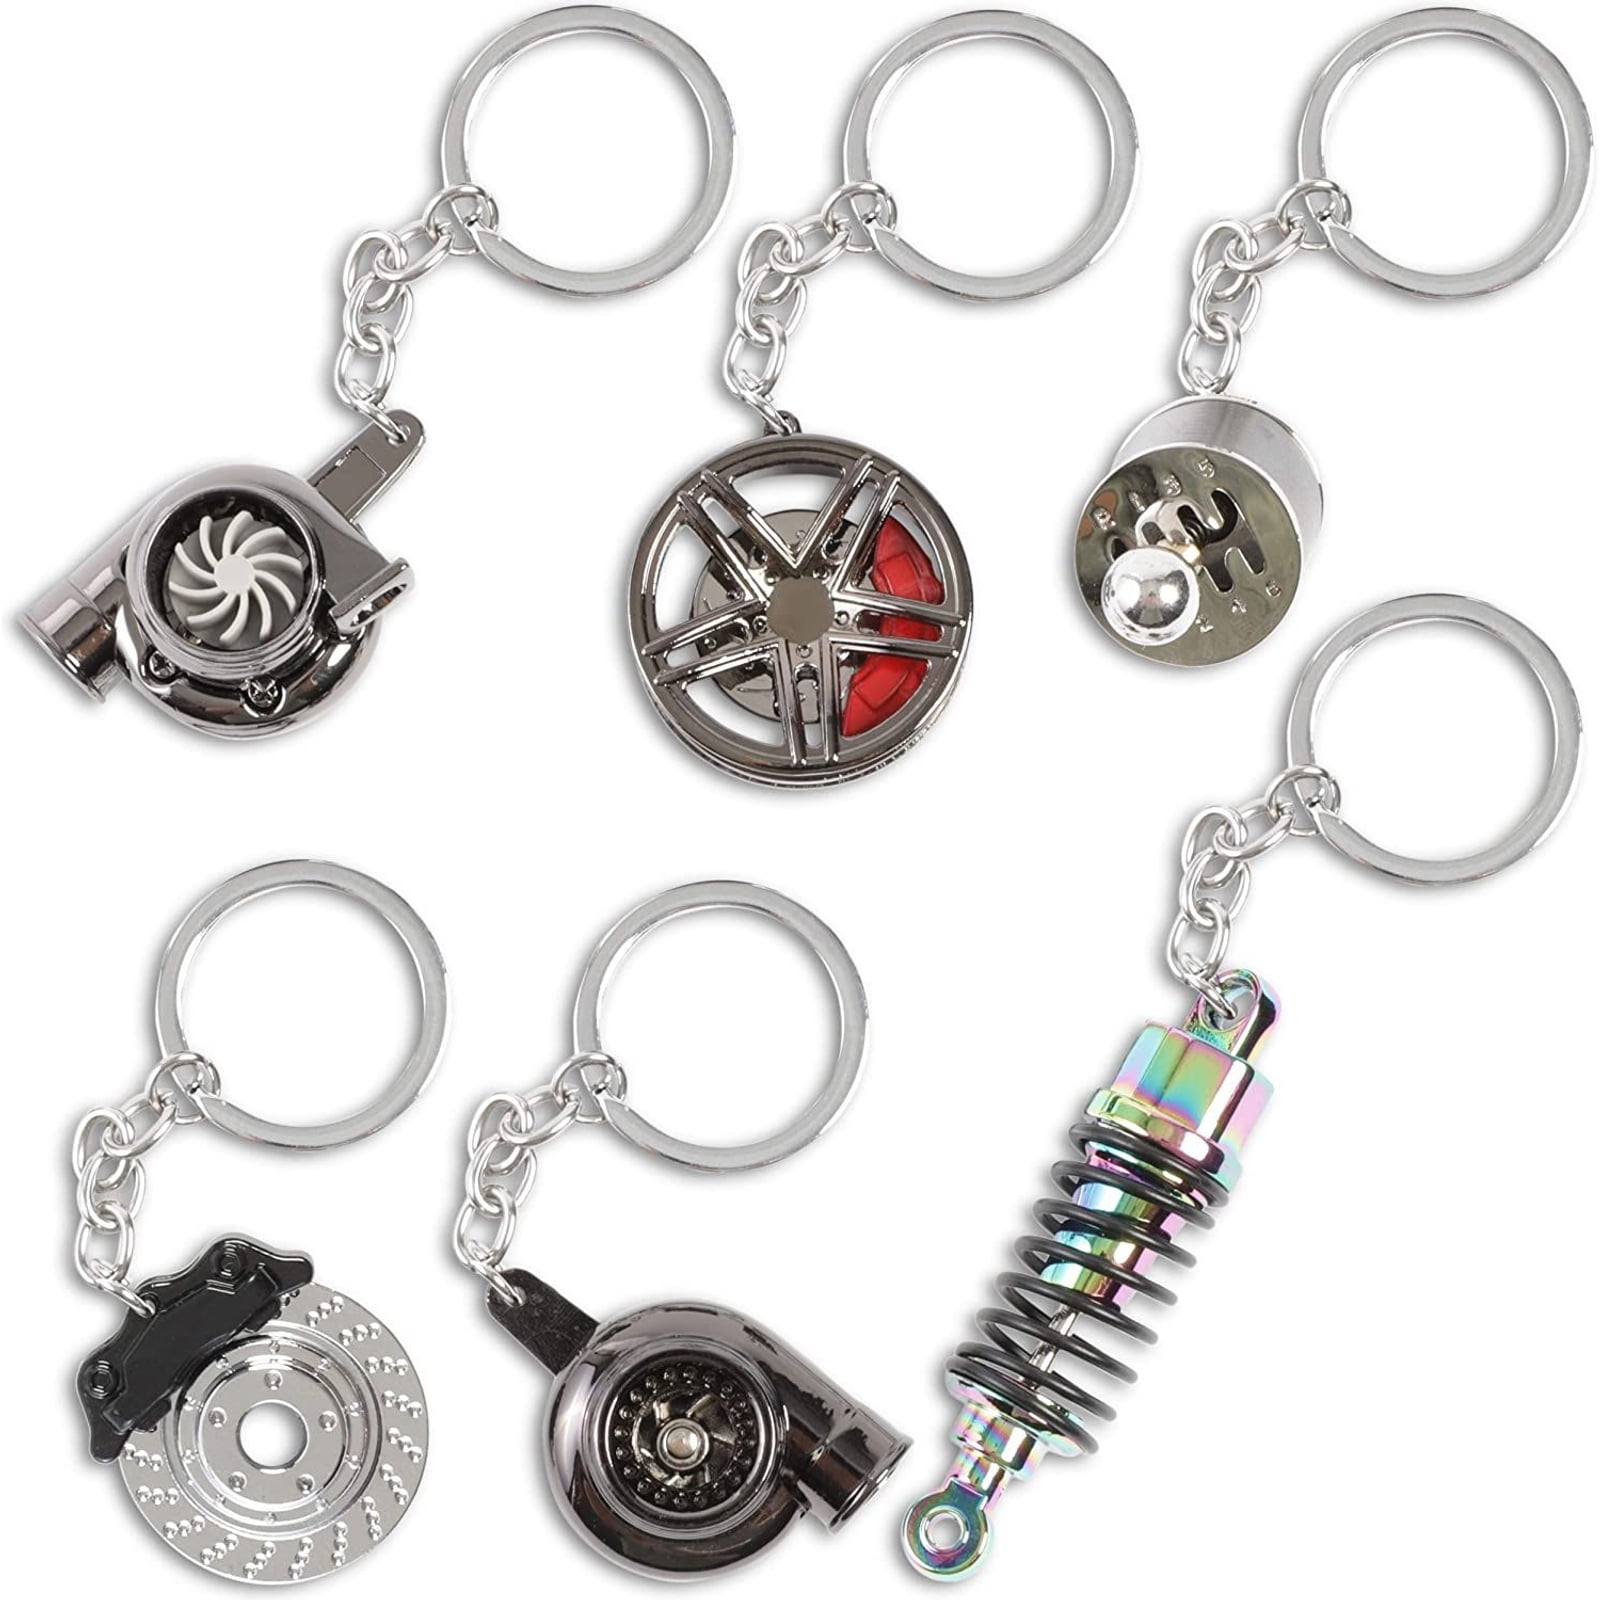 silver stainless steel key ring 6 in a pack 